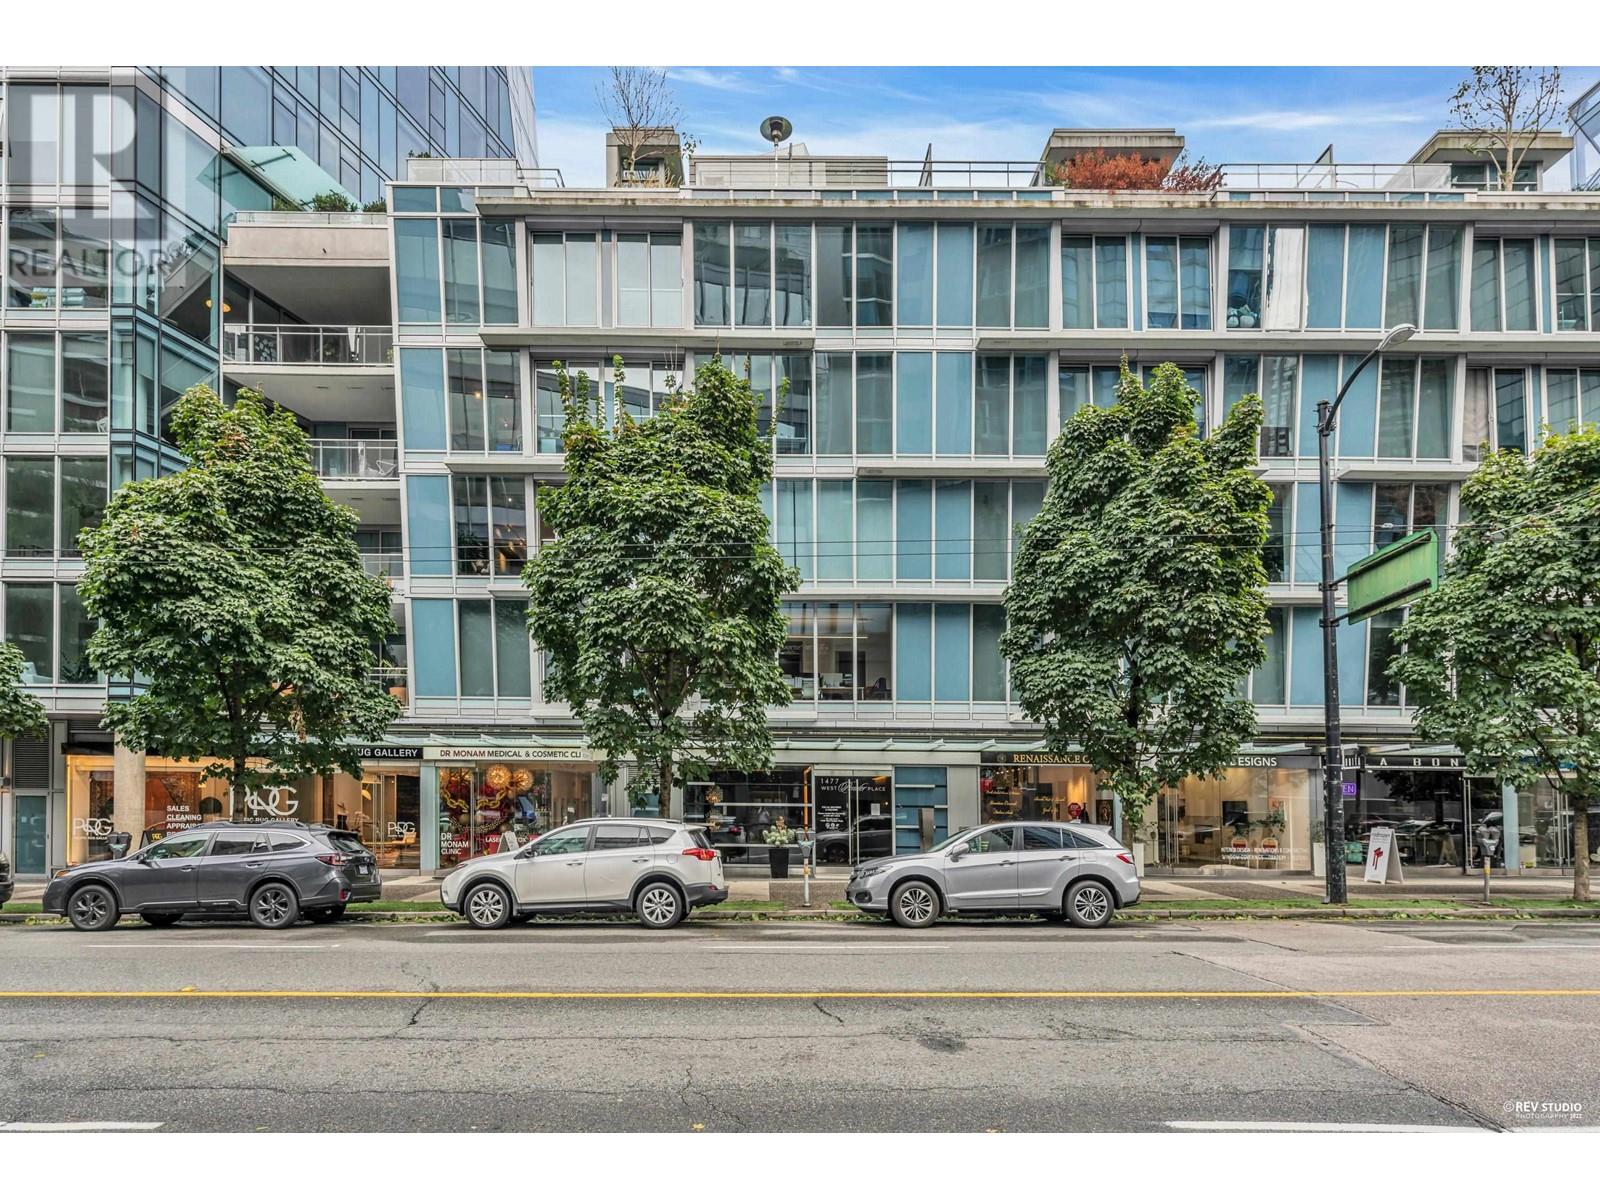 304 1477 W PENDER STREET located in Vancouver, British Columbia